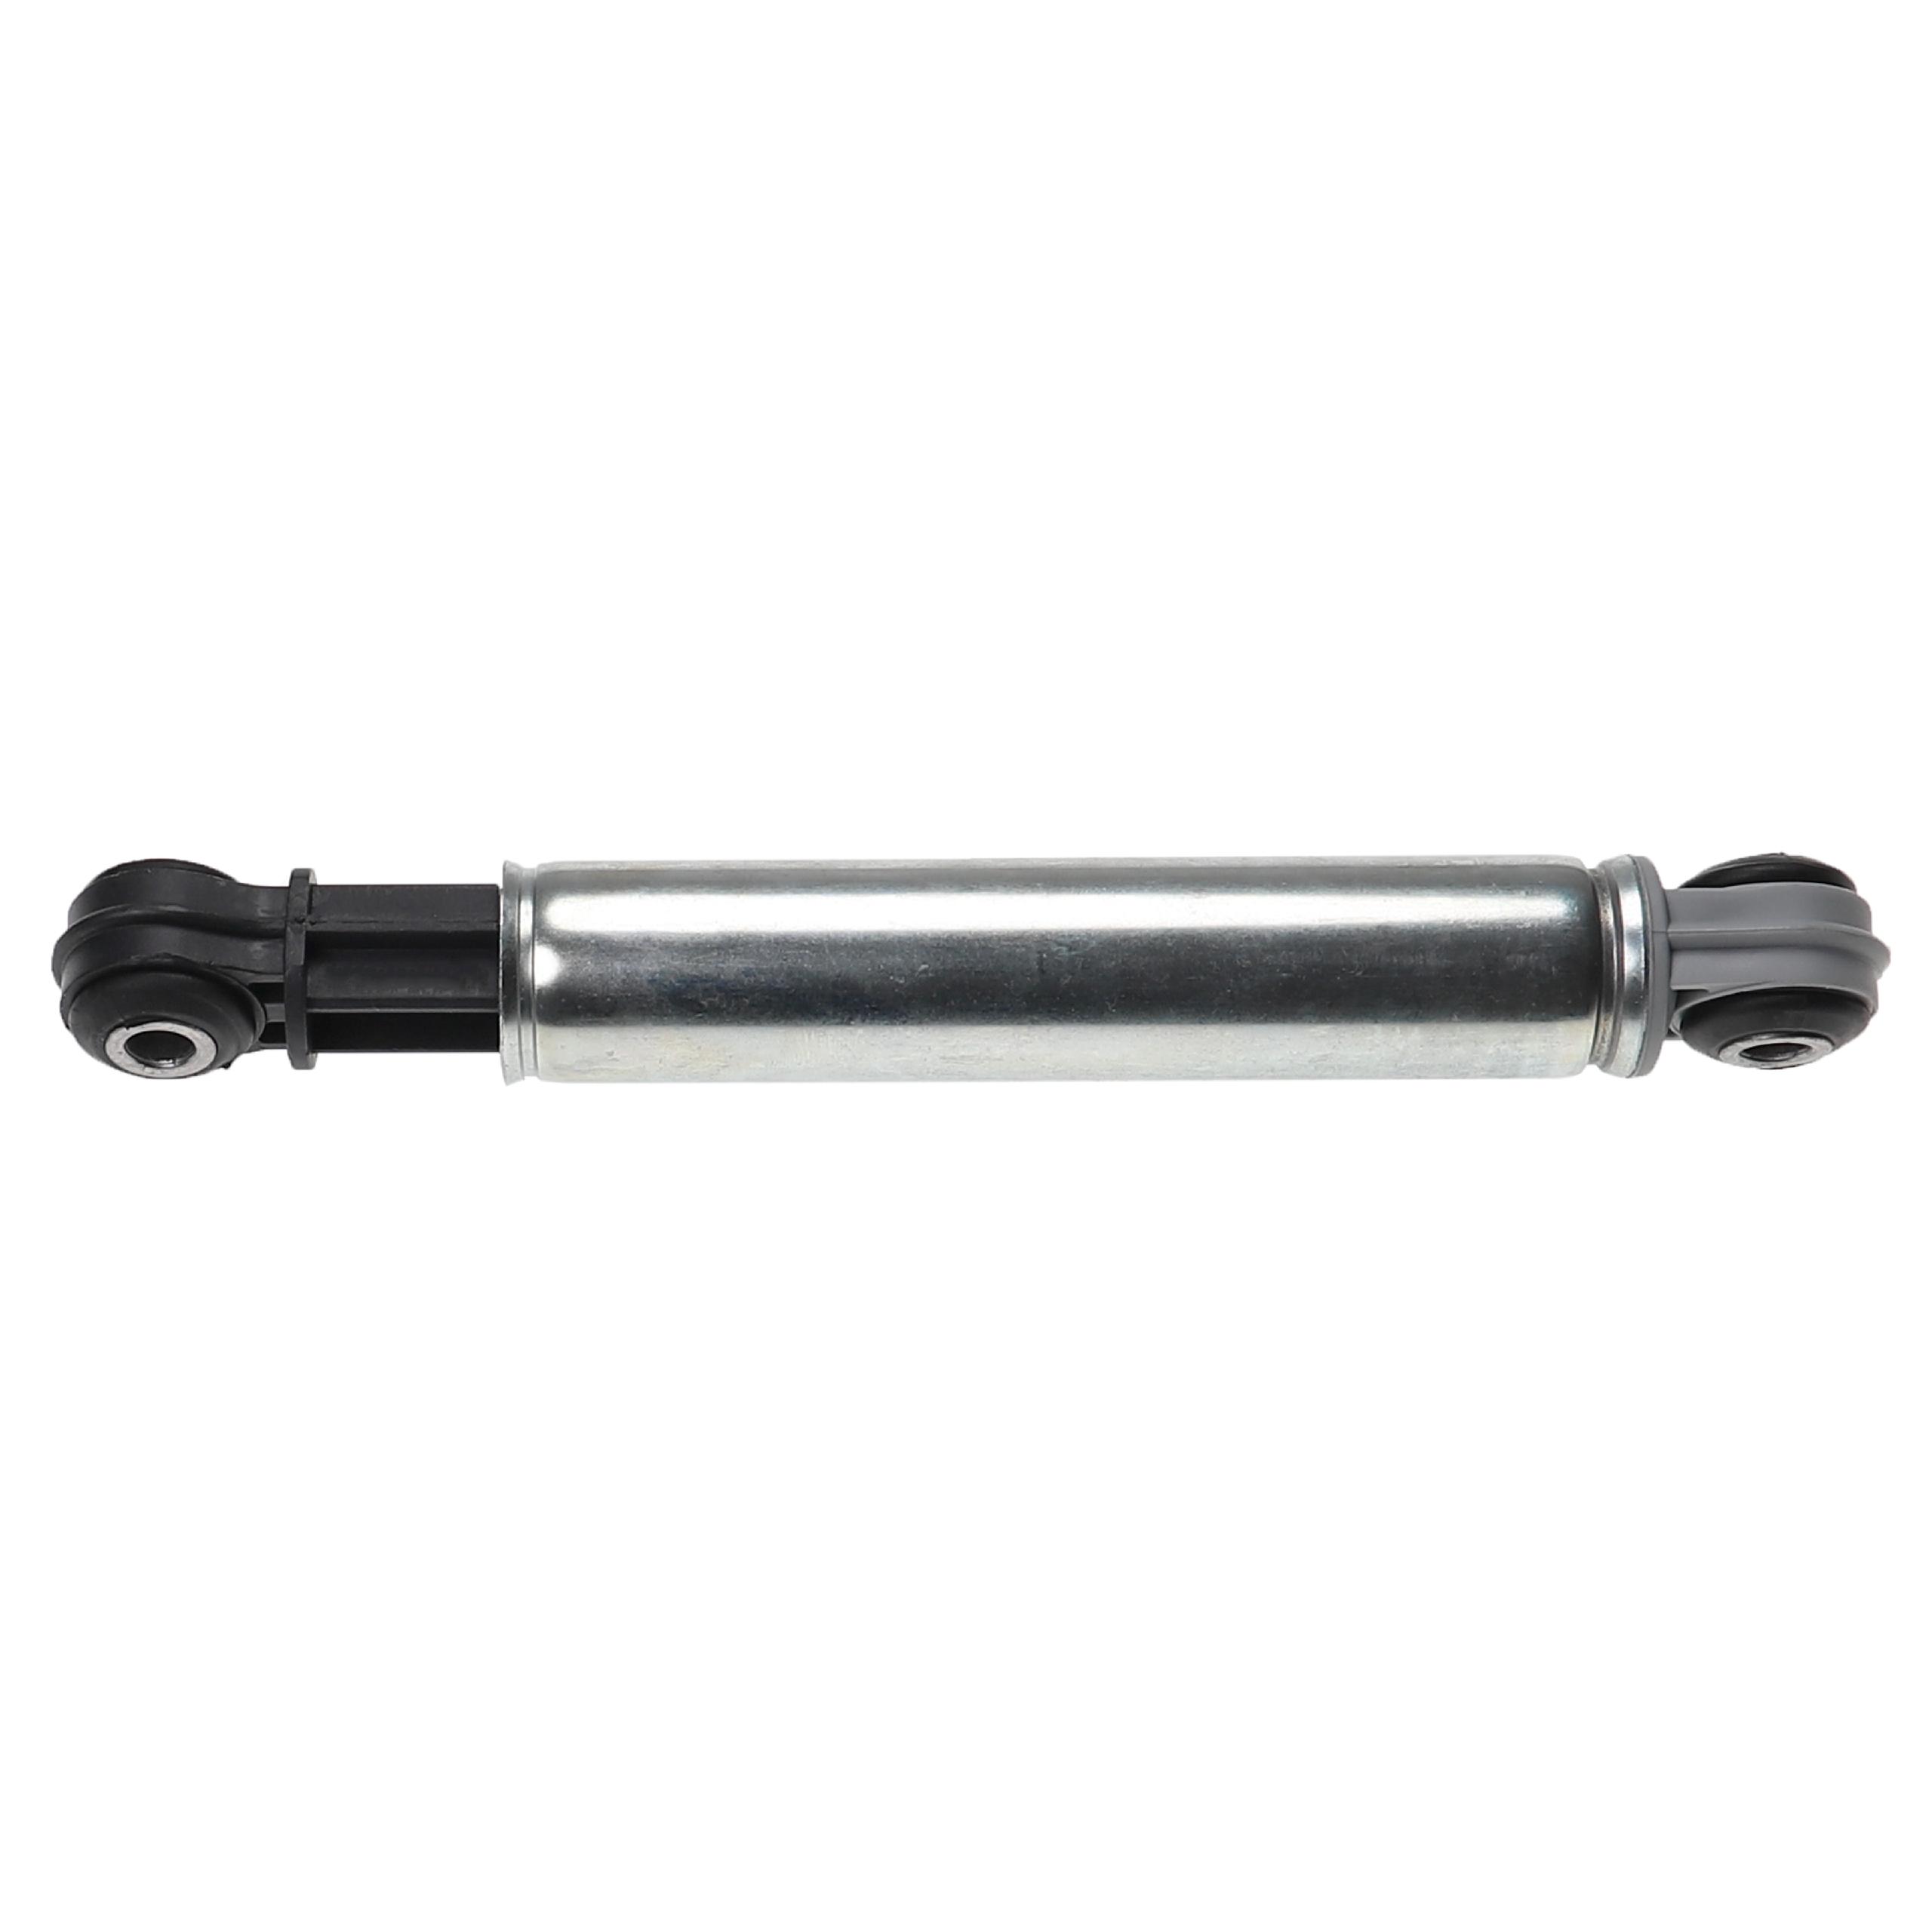 Shock Absorber as Replacement for 00118869 for Washing Machine - 120 N